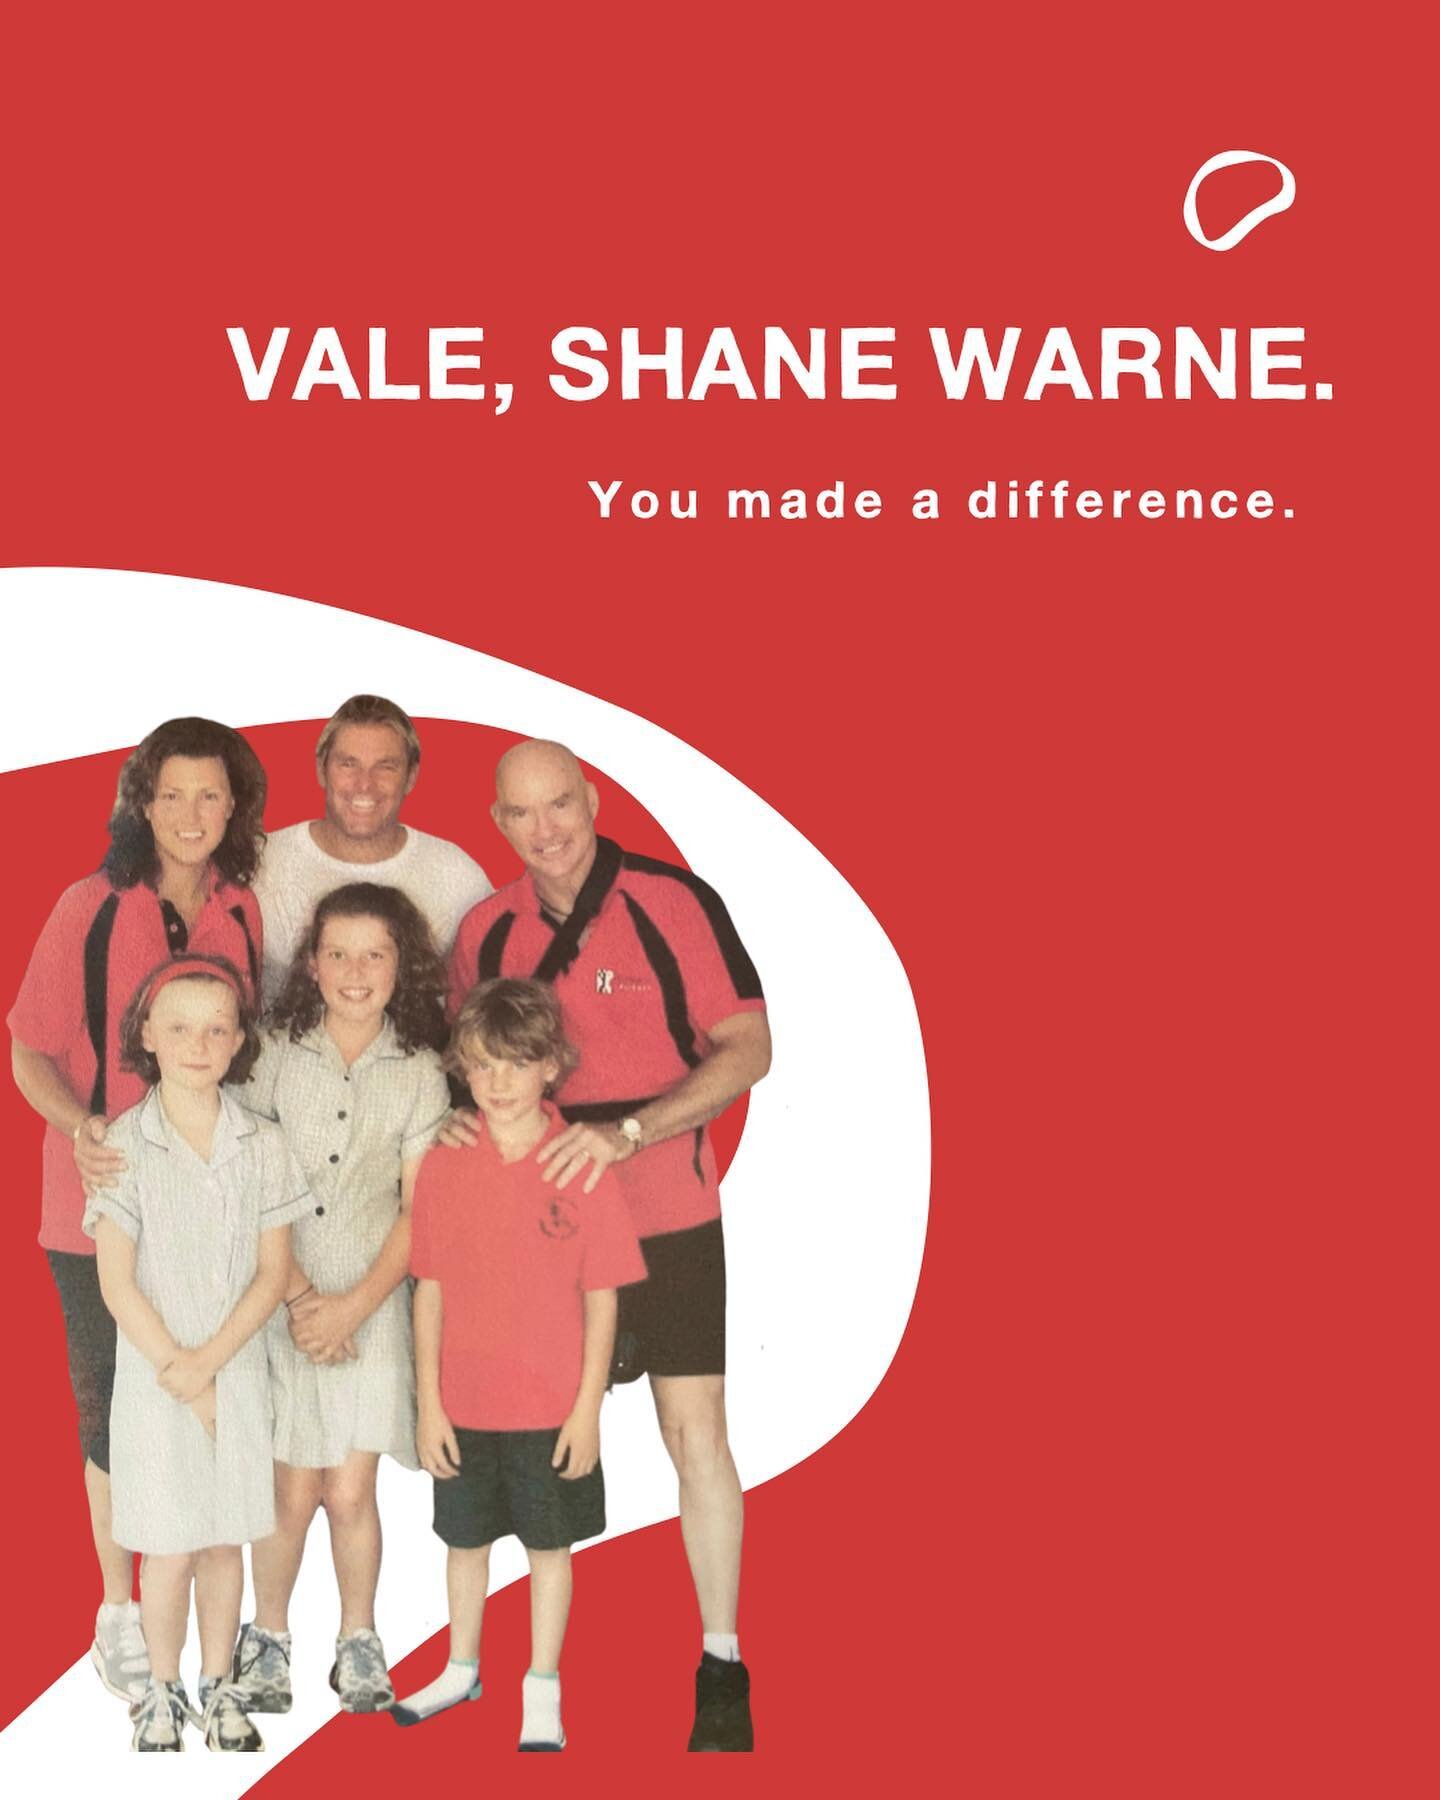 Thank you, Shane Warne. Our thoughts are with your family and loved ones. 

🤍

Slide one
In white text over maroon background: &ldquo;Vale, Shane Warne. You made a difference.&rdquo;

Slide two
In white text over maroon background: &ldquo;Our commun